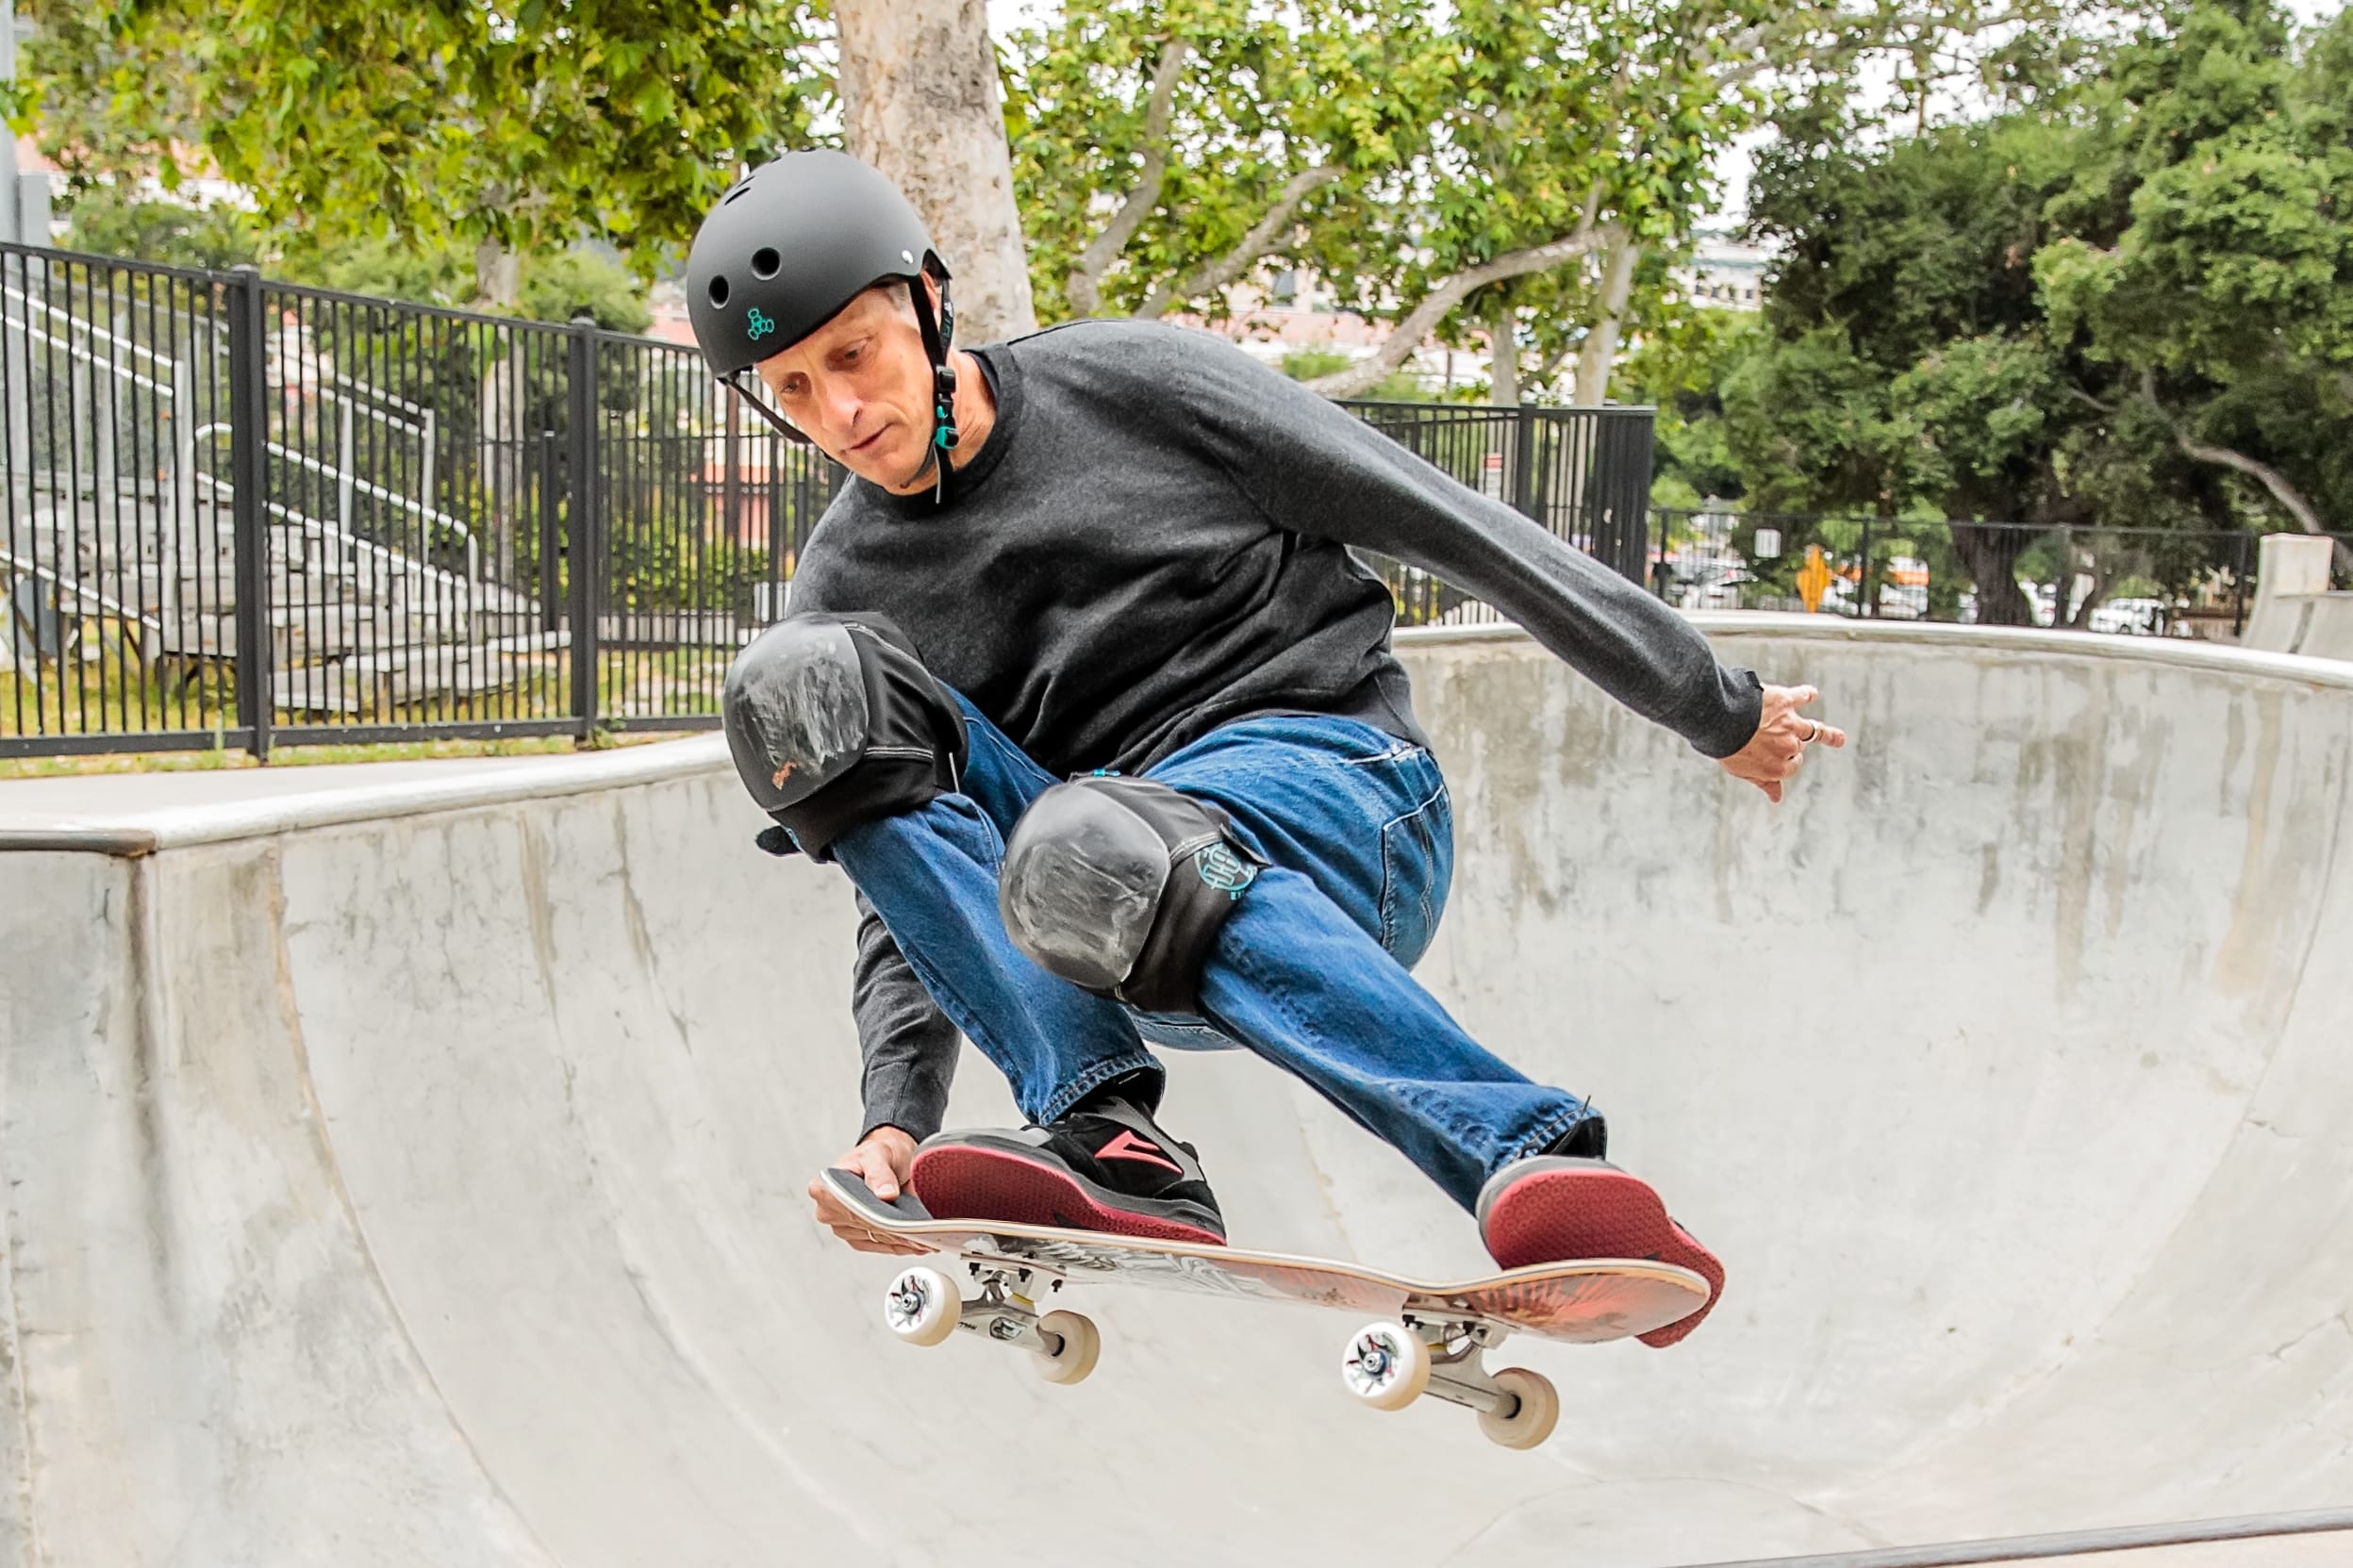 Tony Hawk fans can now buy skateboards filled with his blood